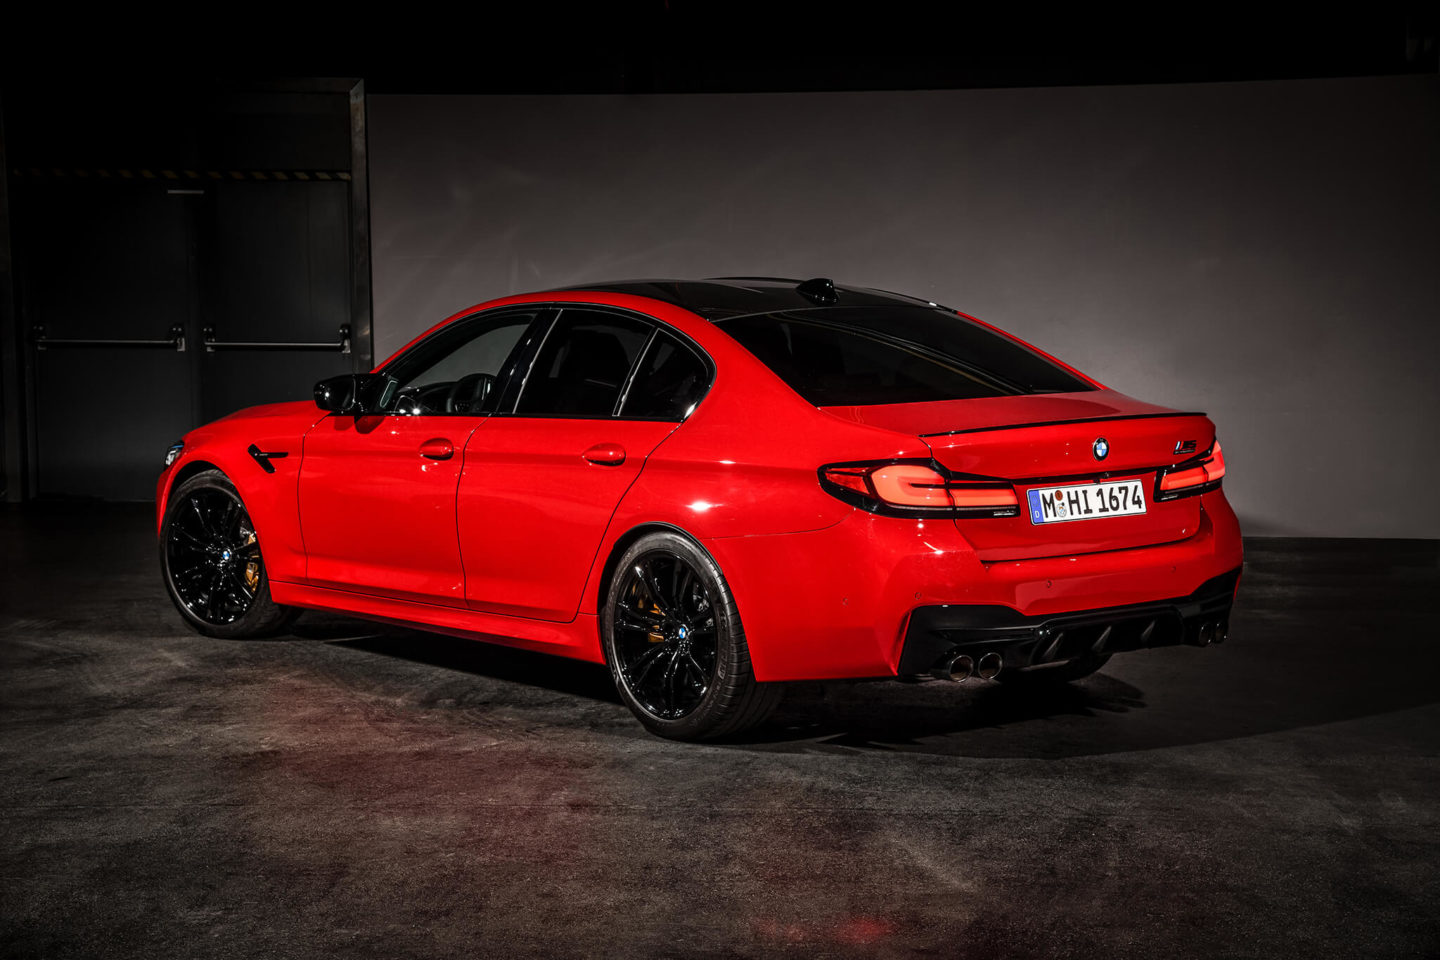 BMW M5 Competition 2020